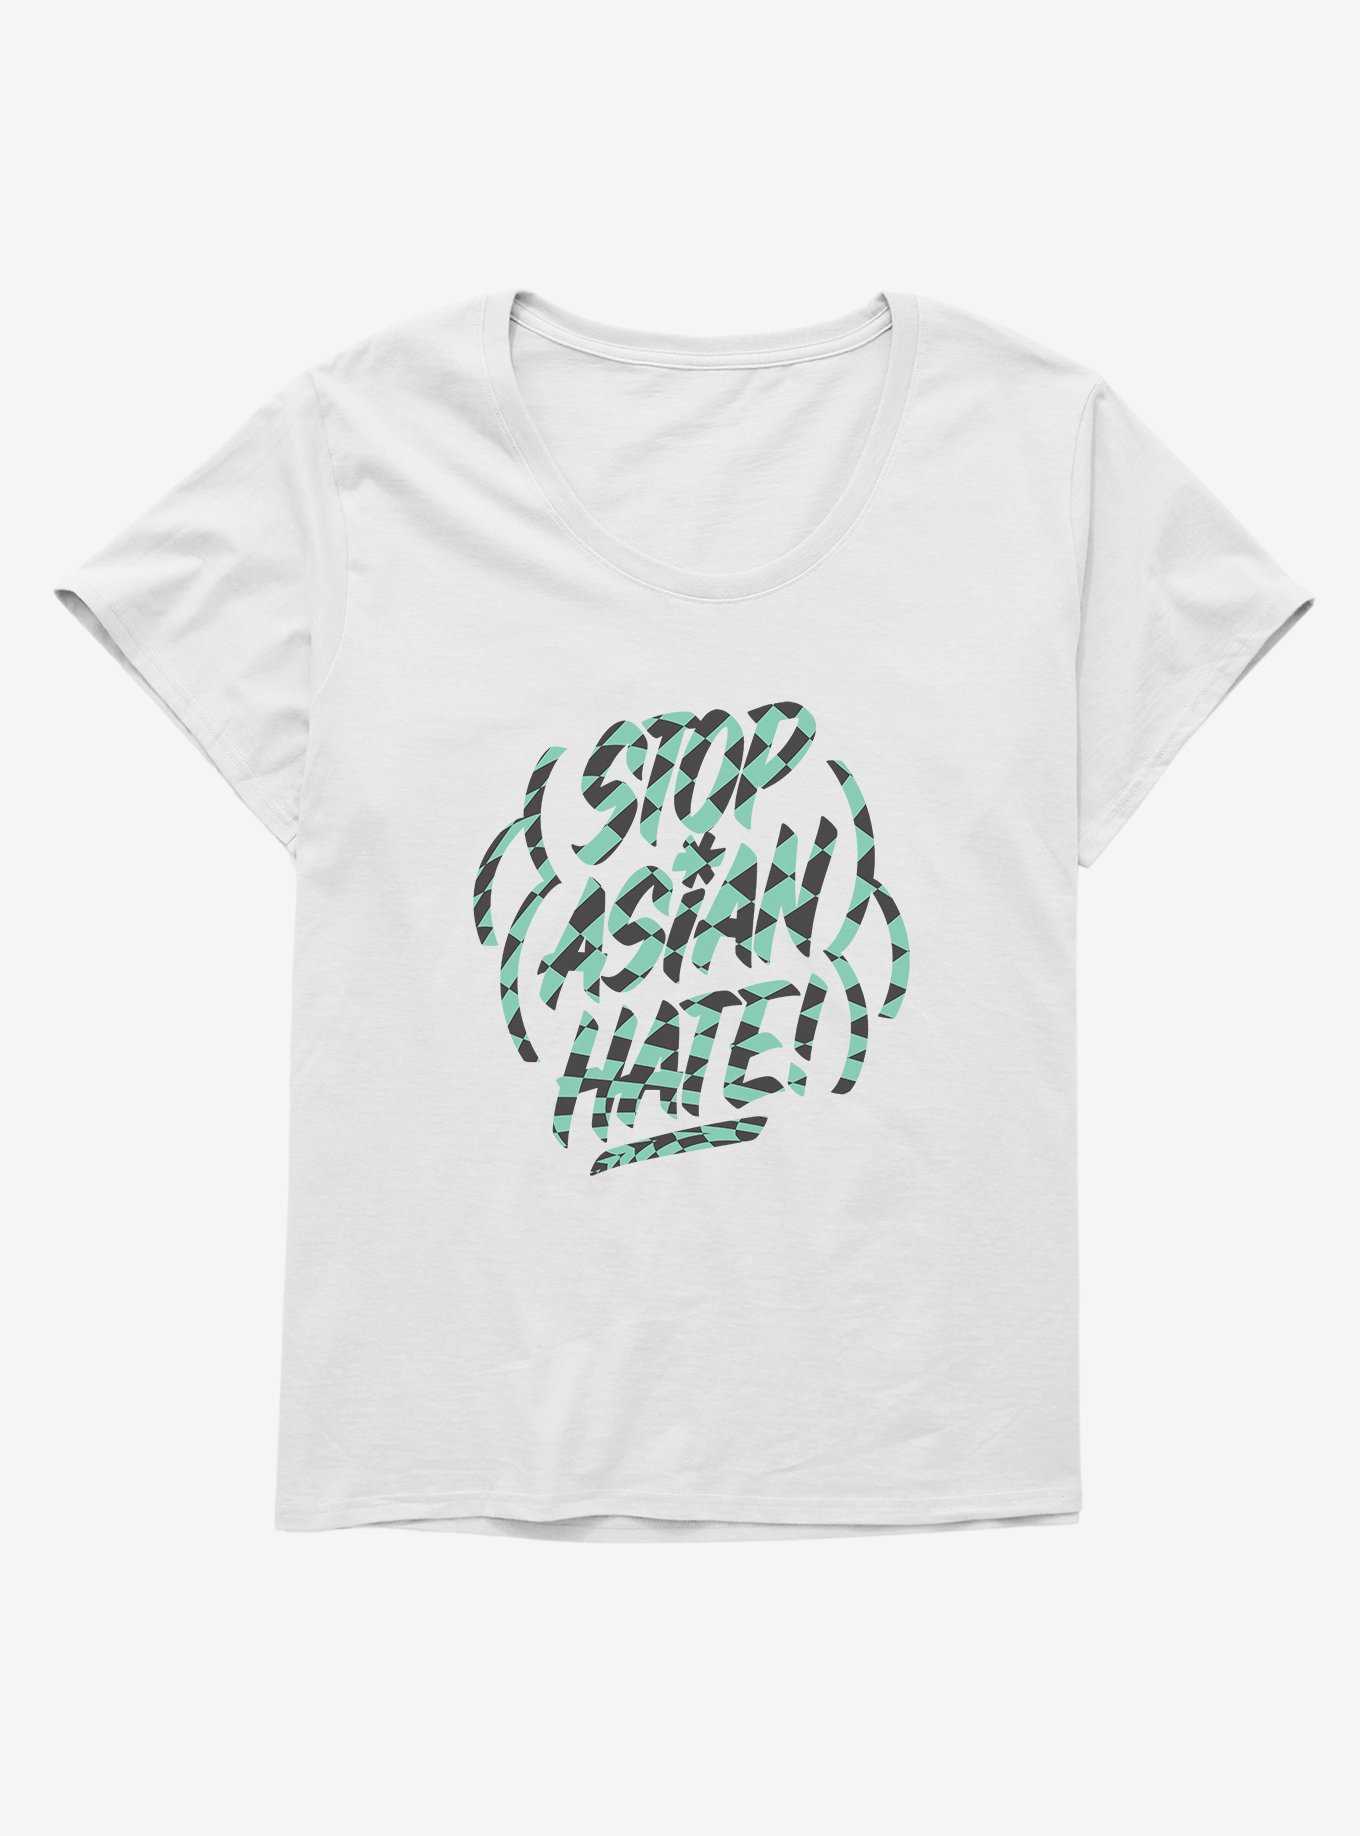 Checkered Stop Asian Hate Girls T-Shirt Plus Size, , hi-res